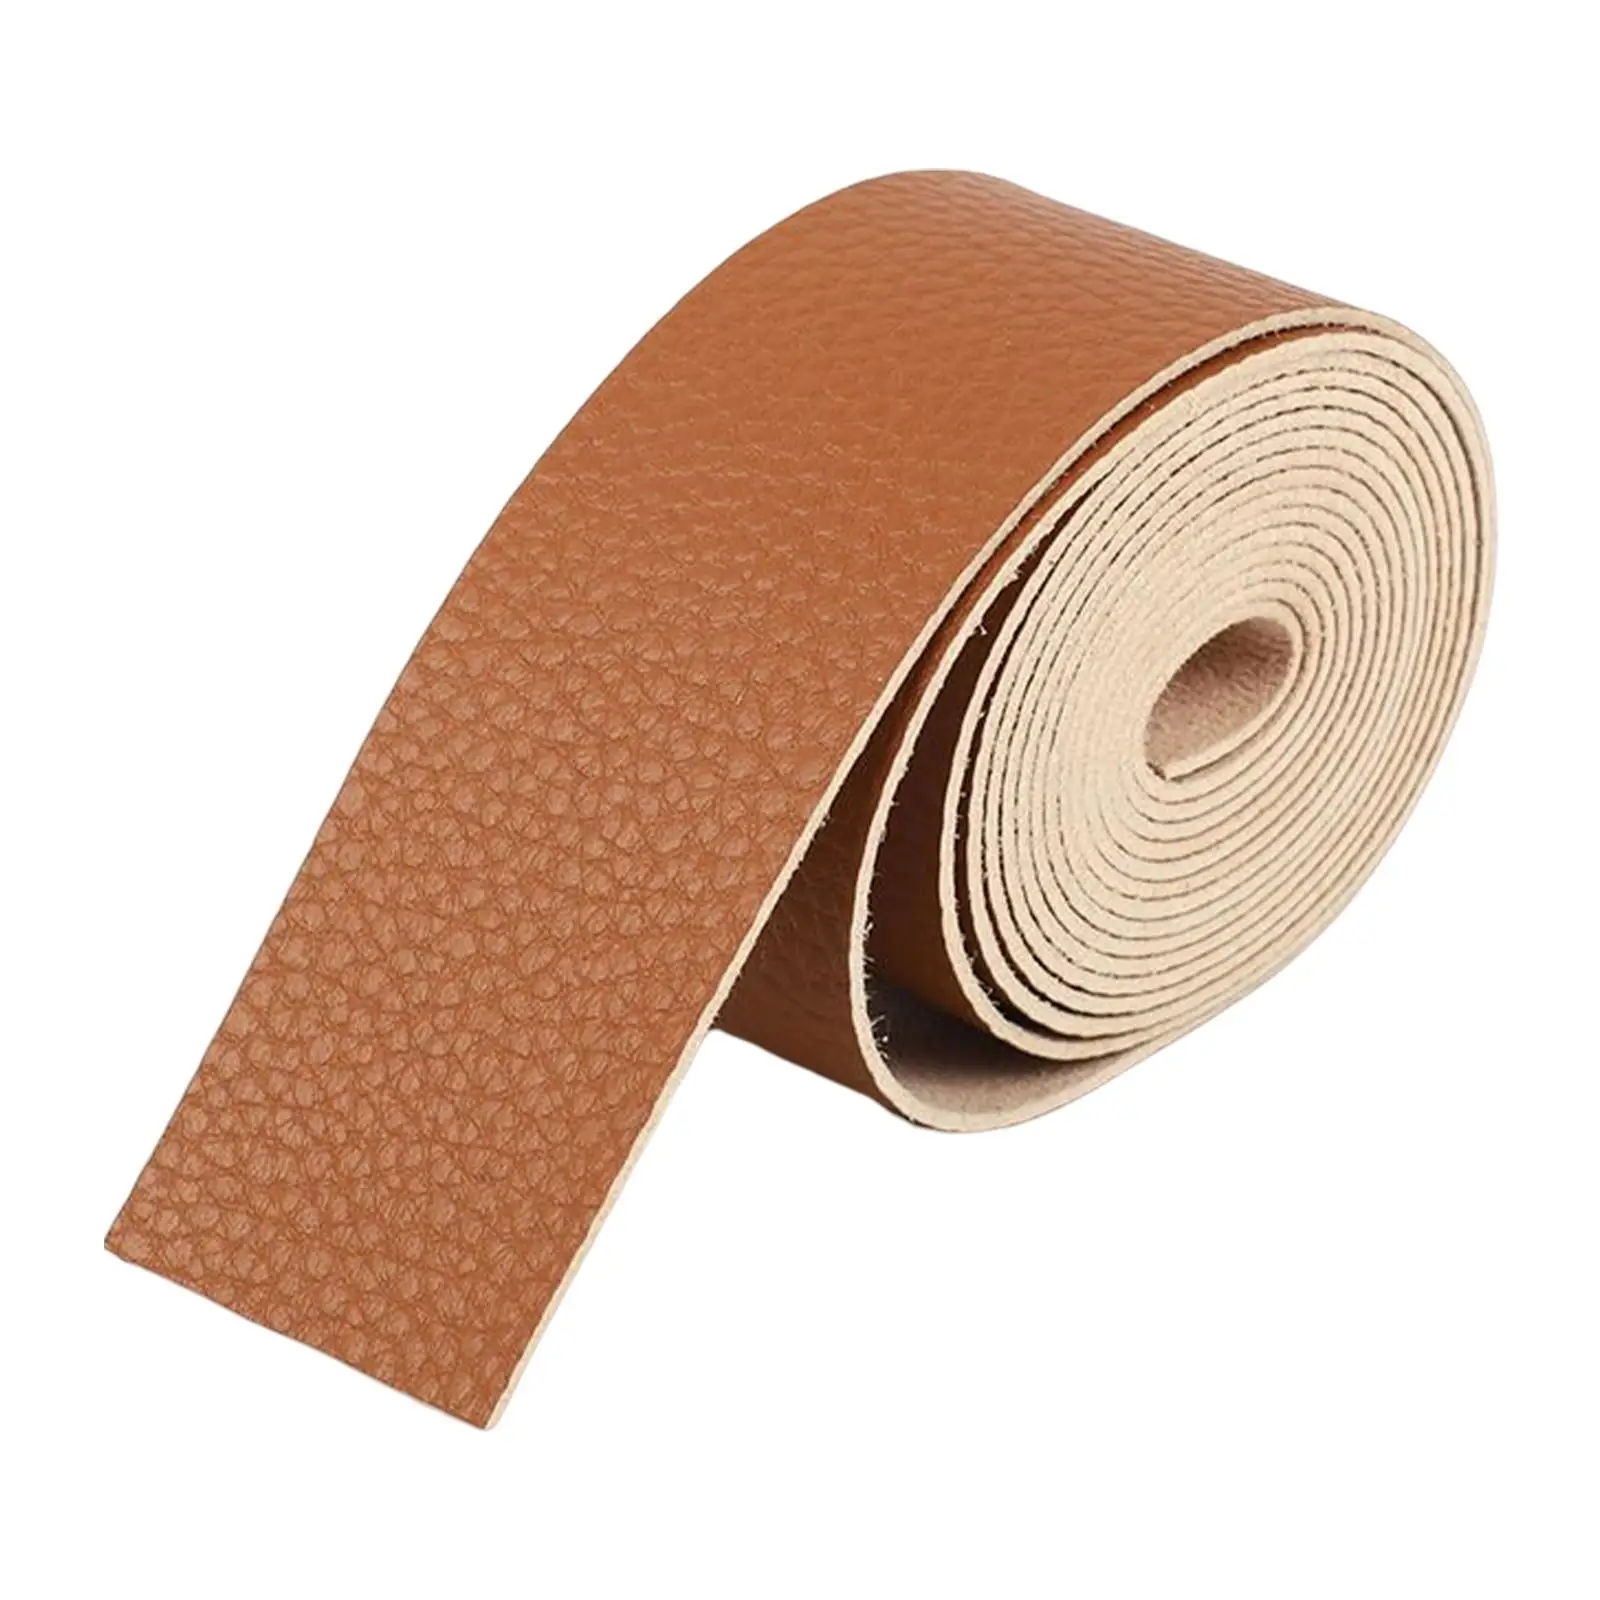 Faux Leather Strap Strips Art Decorative Supplies DIY Belt Band for Clothing